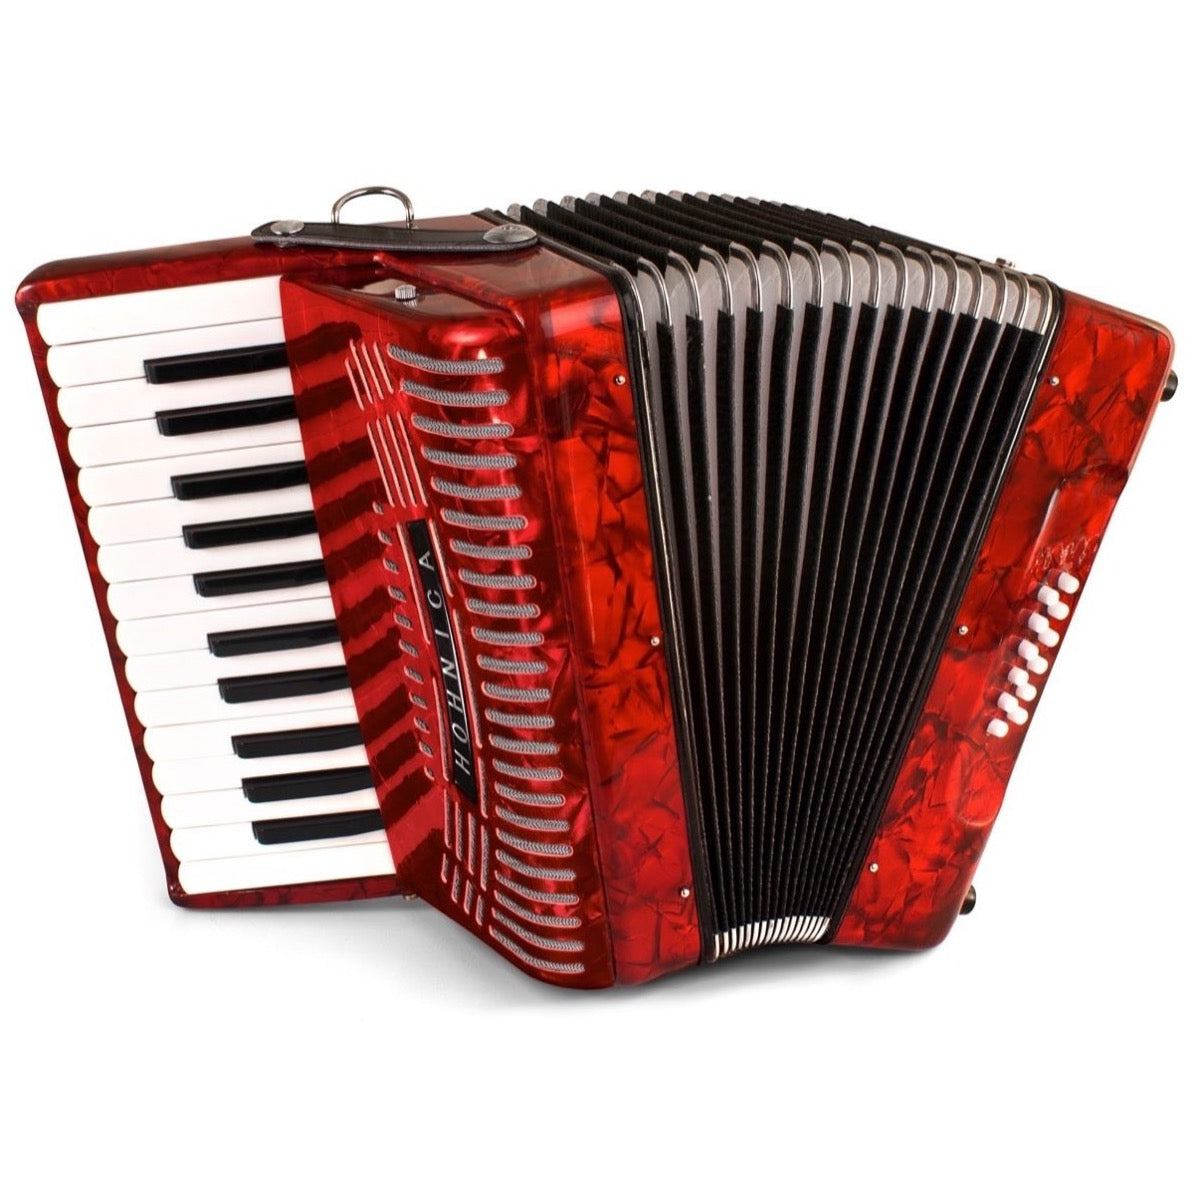 Hohner 1303-RED Piano 12 Bass Accordion, Pearl Red